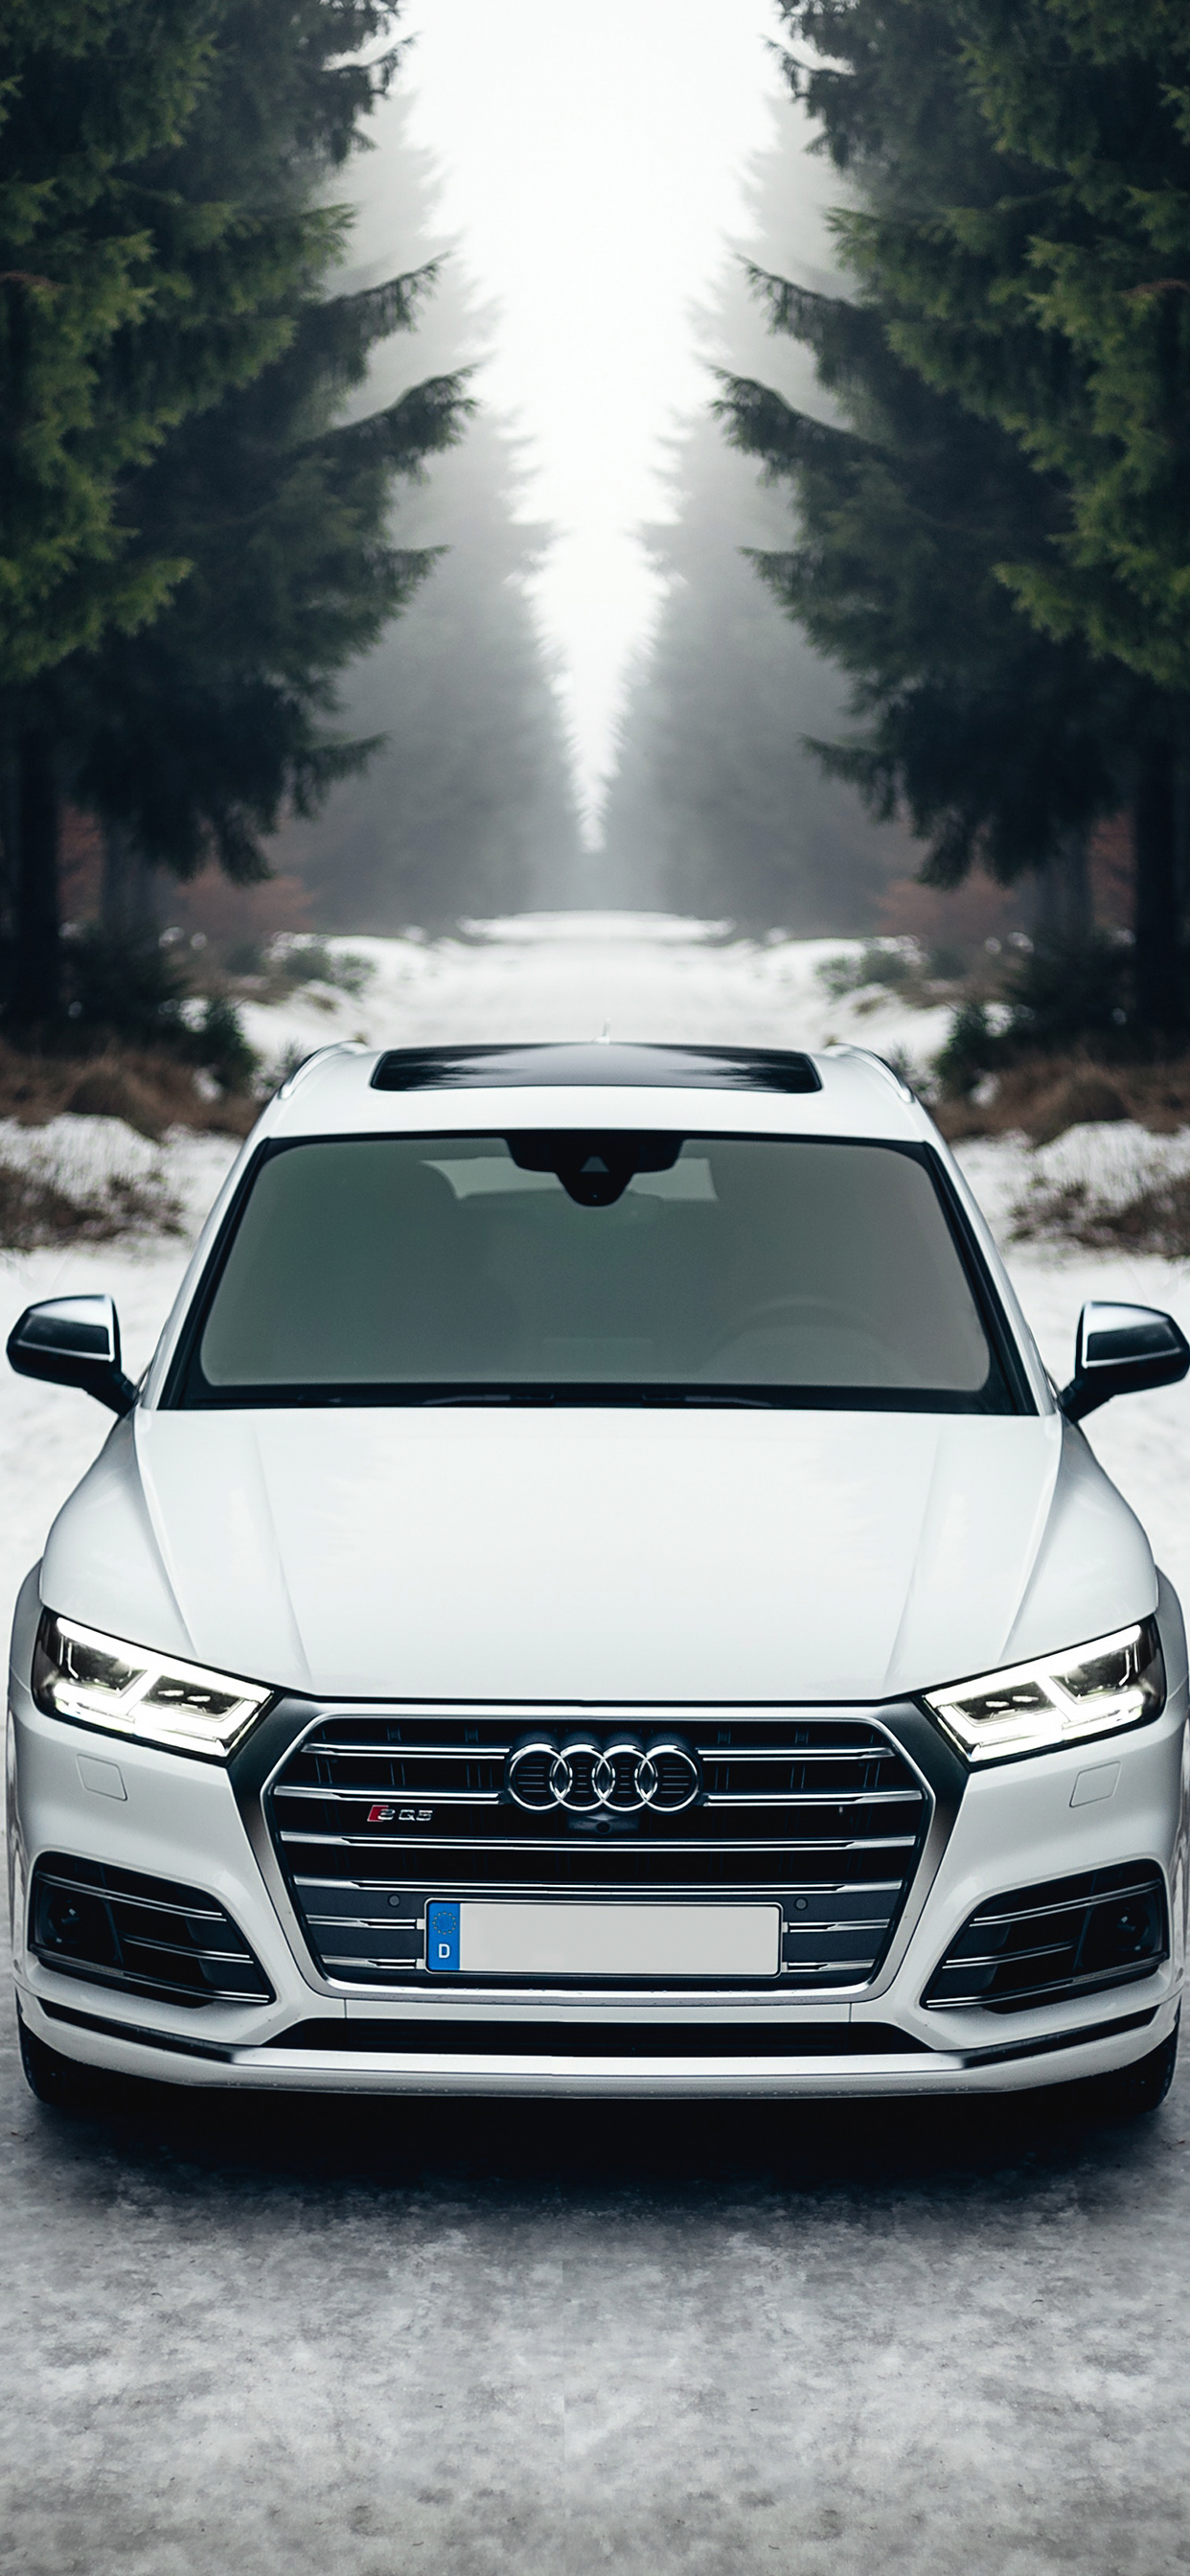 Audi Wallpaper for iPhone Pro Max, X, 6